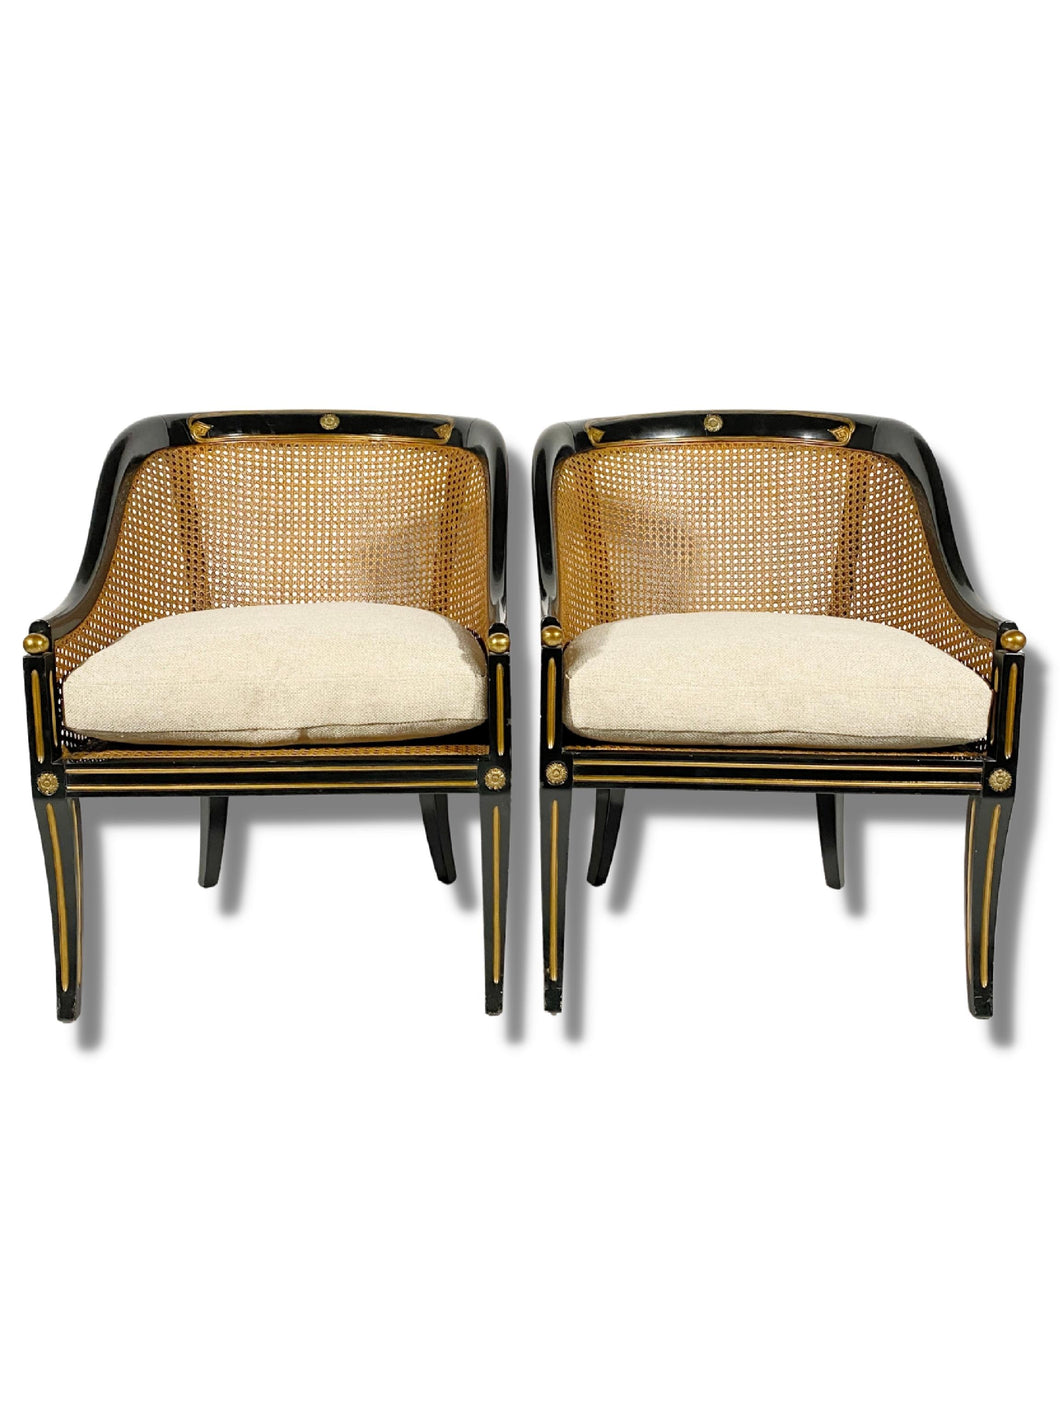 Regency Caned Occasional Chairs (Pair)